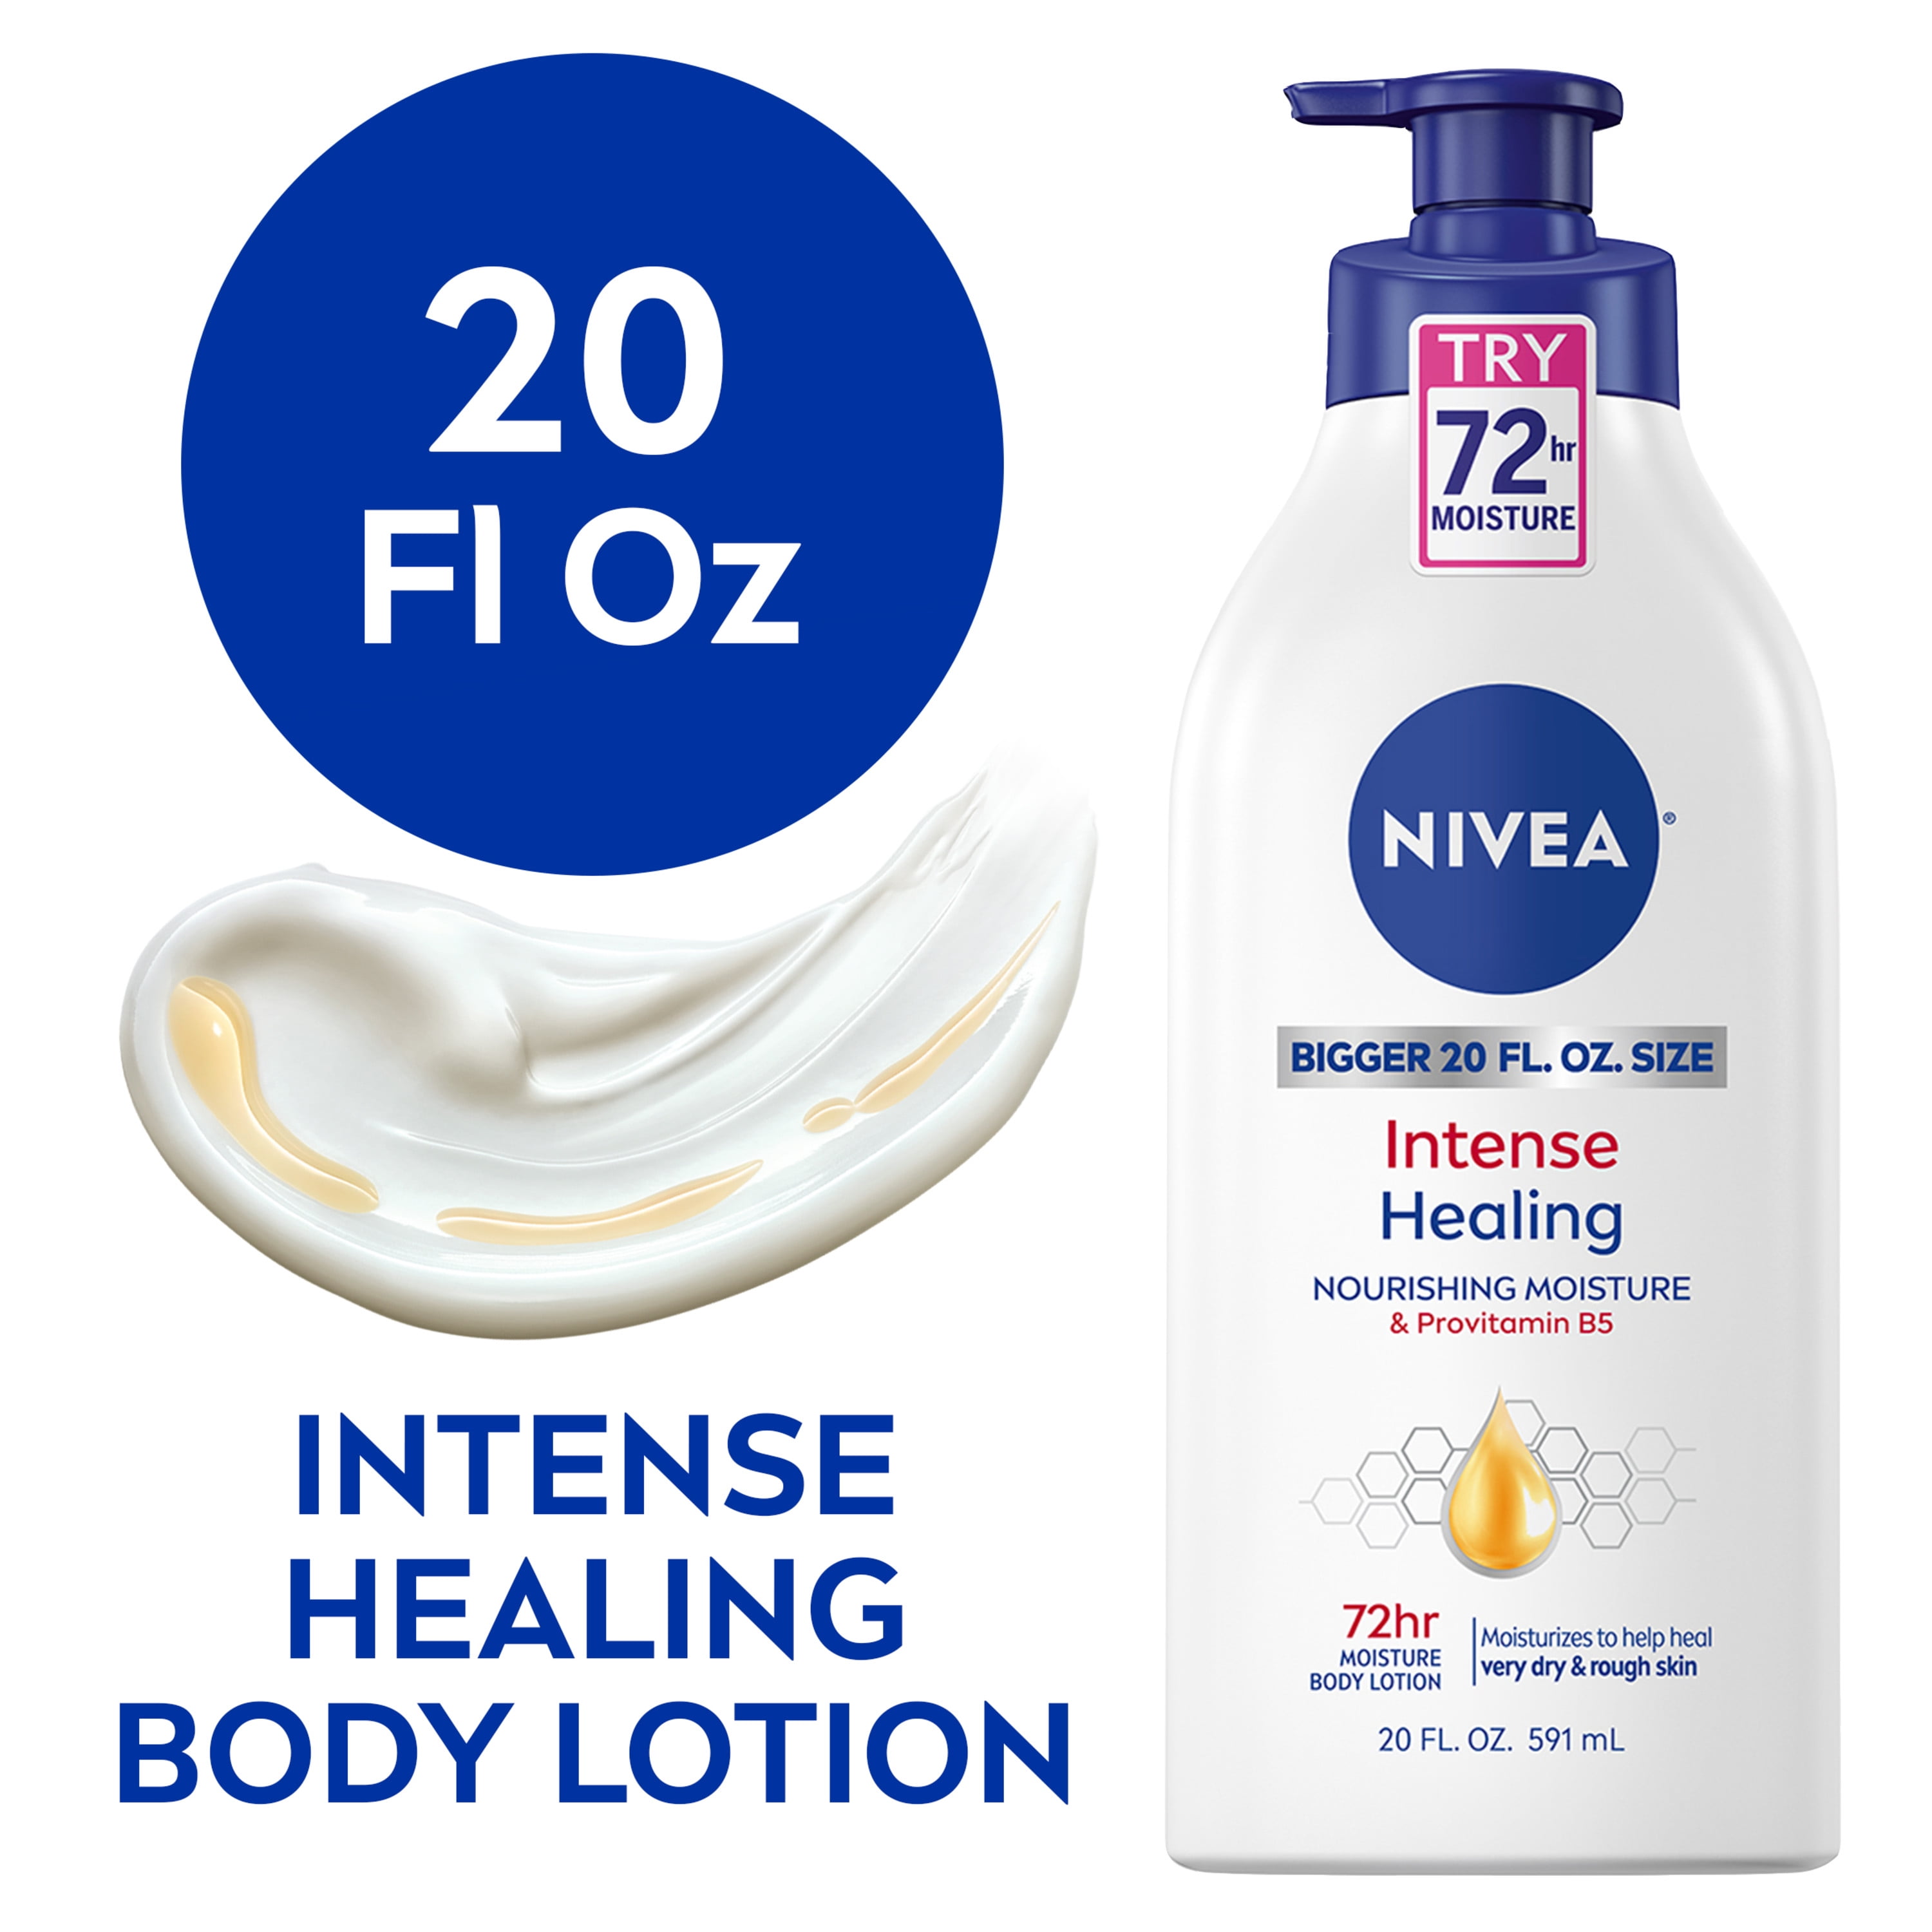 NIVEA Intense Healing Body Lotion, 72 Hour Moisture for Dry to Very Dry Skin, 20 Fl Oz Pump Bottle